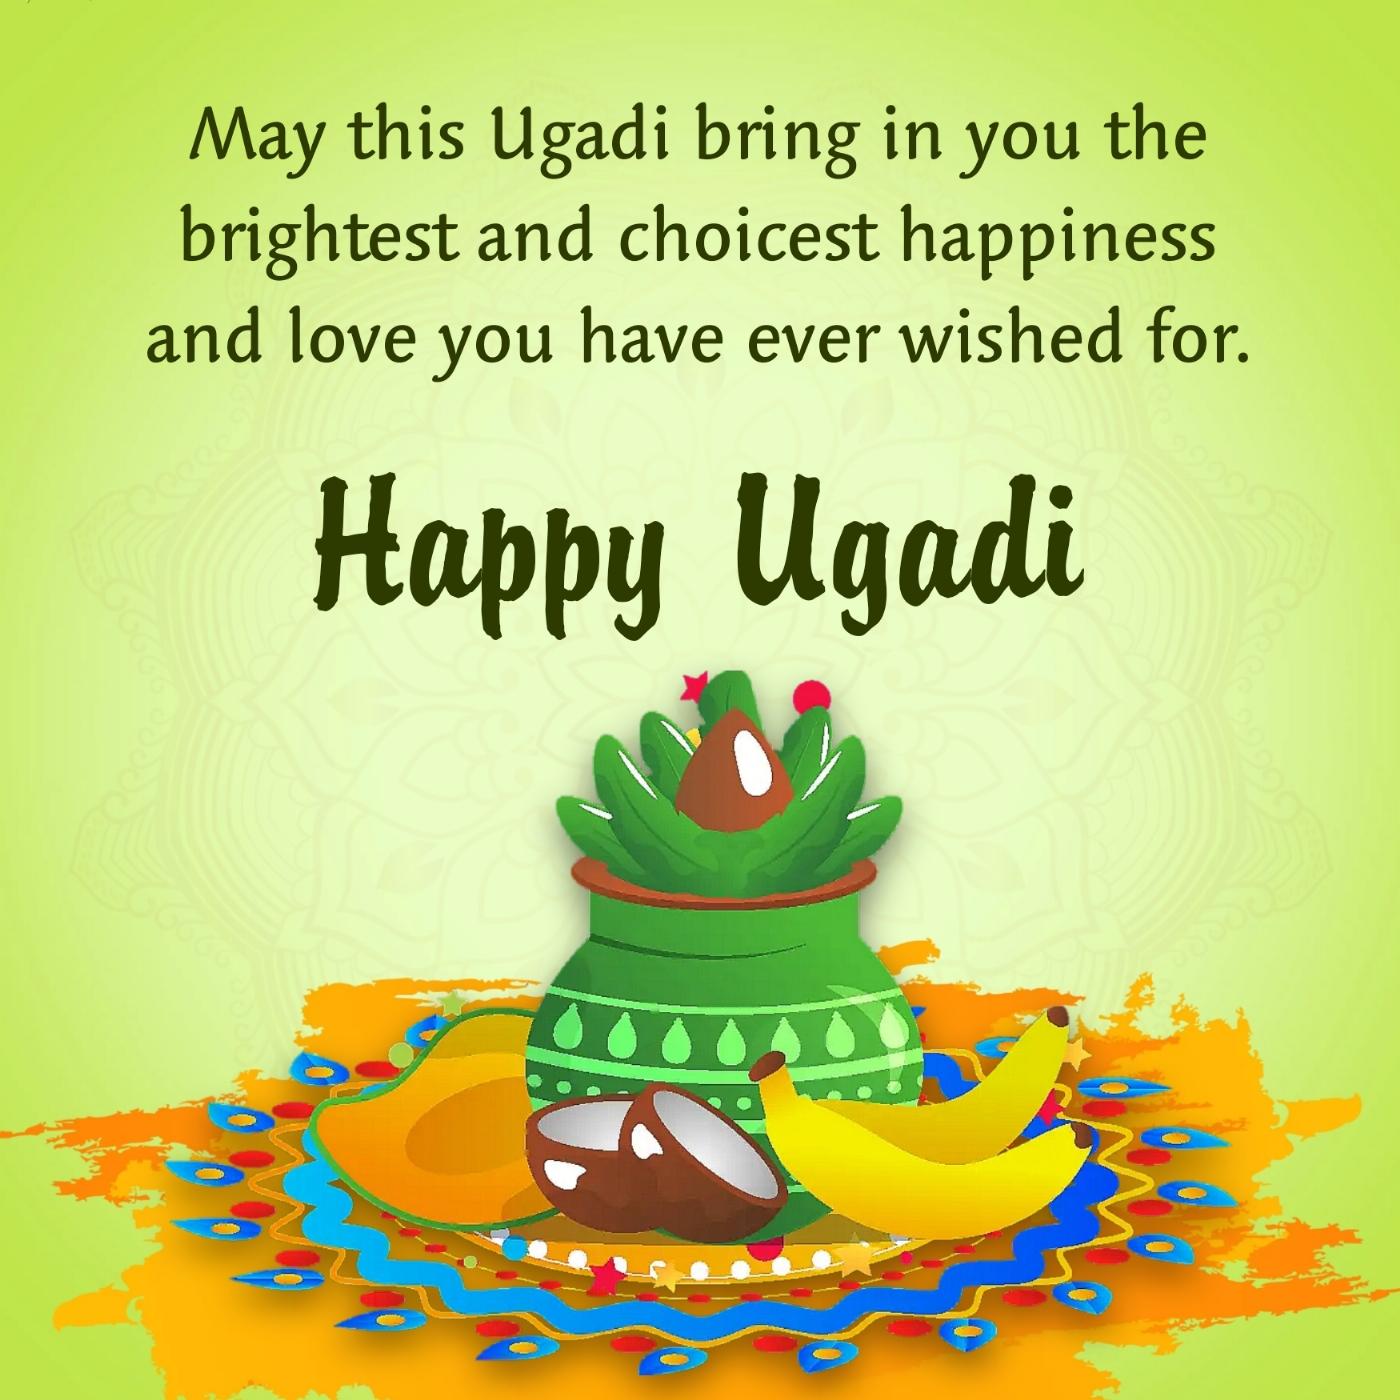 May this Ugadi bring in you the brightest and choicest happiness